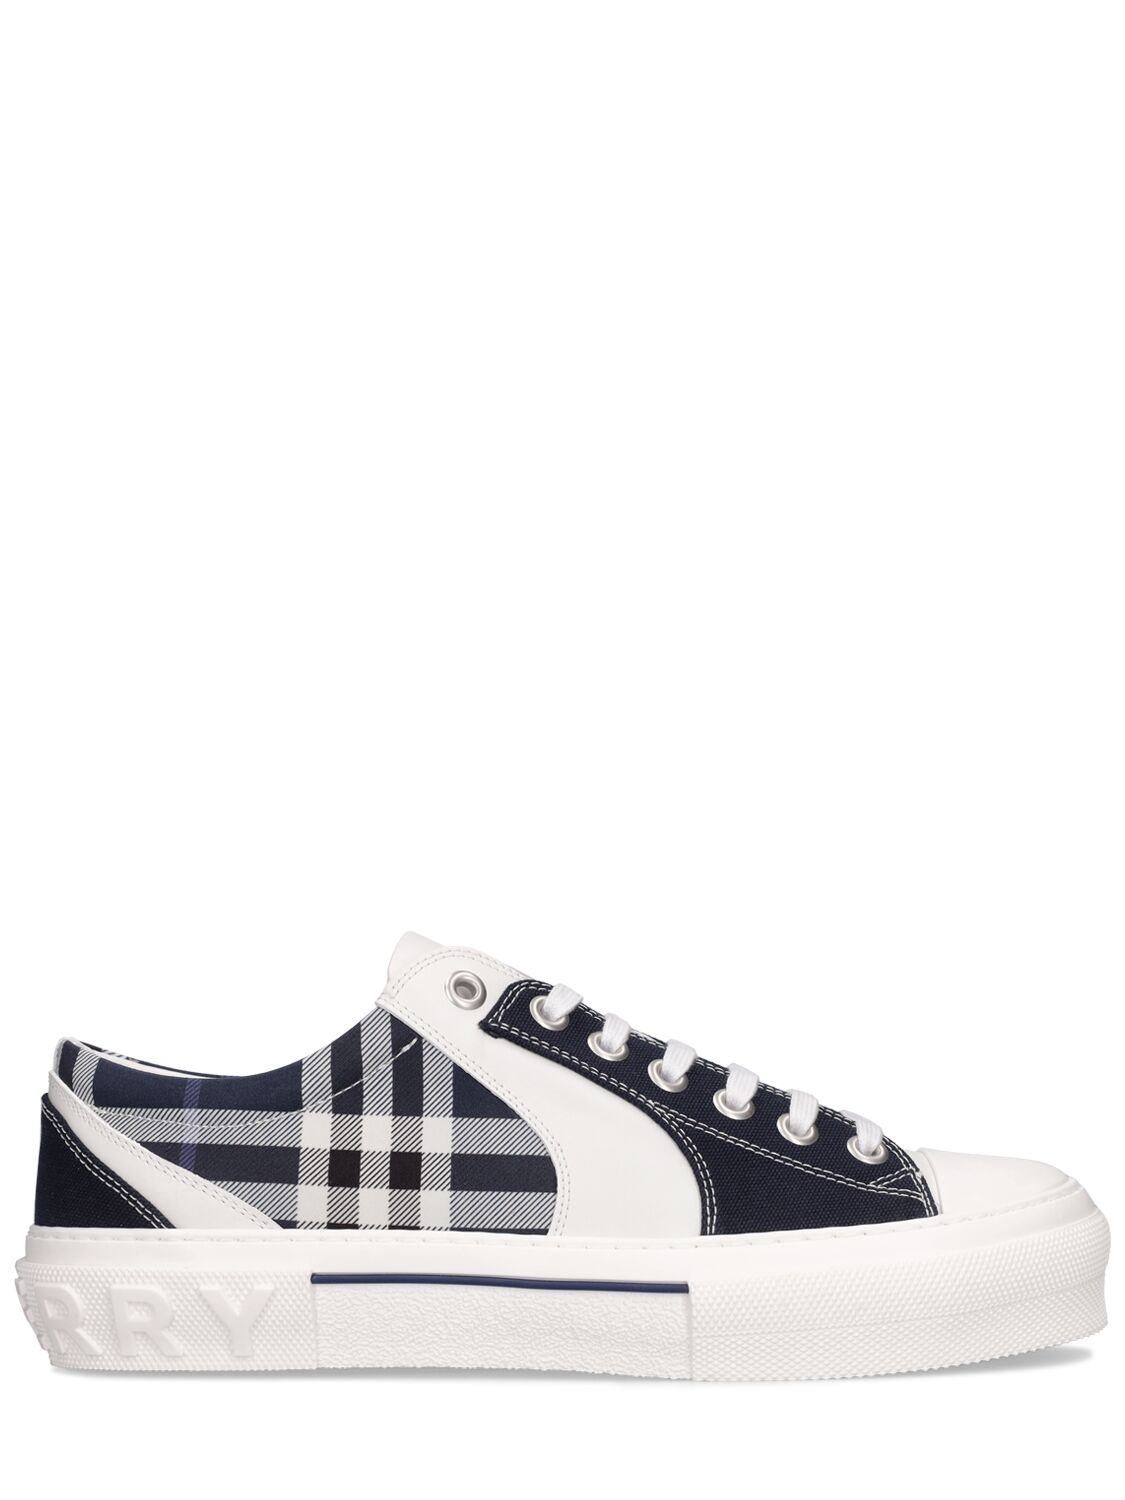 Burberry Vintage Check Low-top Sneakers In Multi